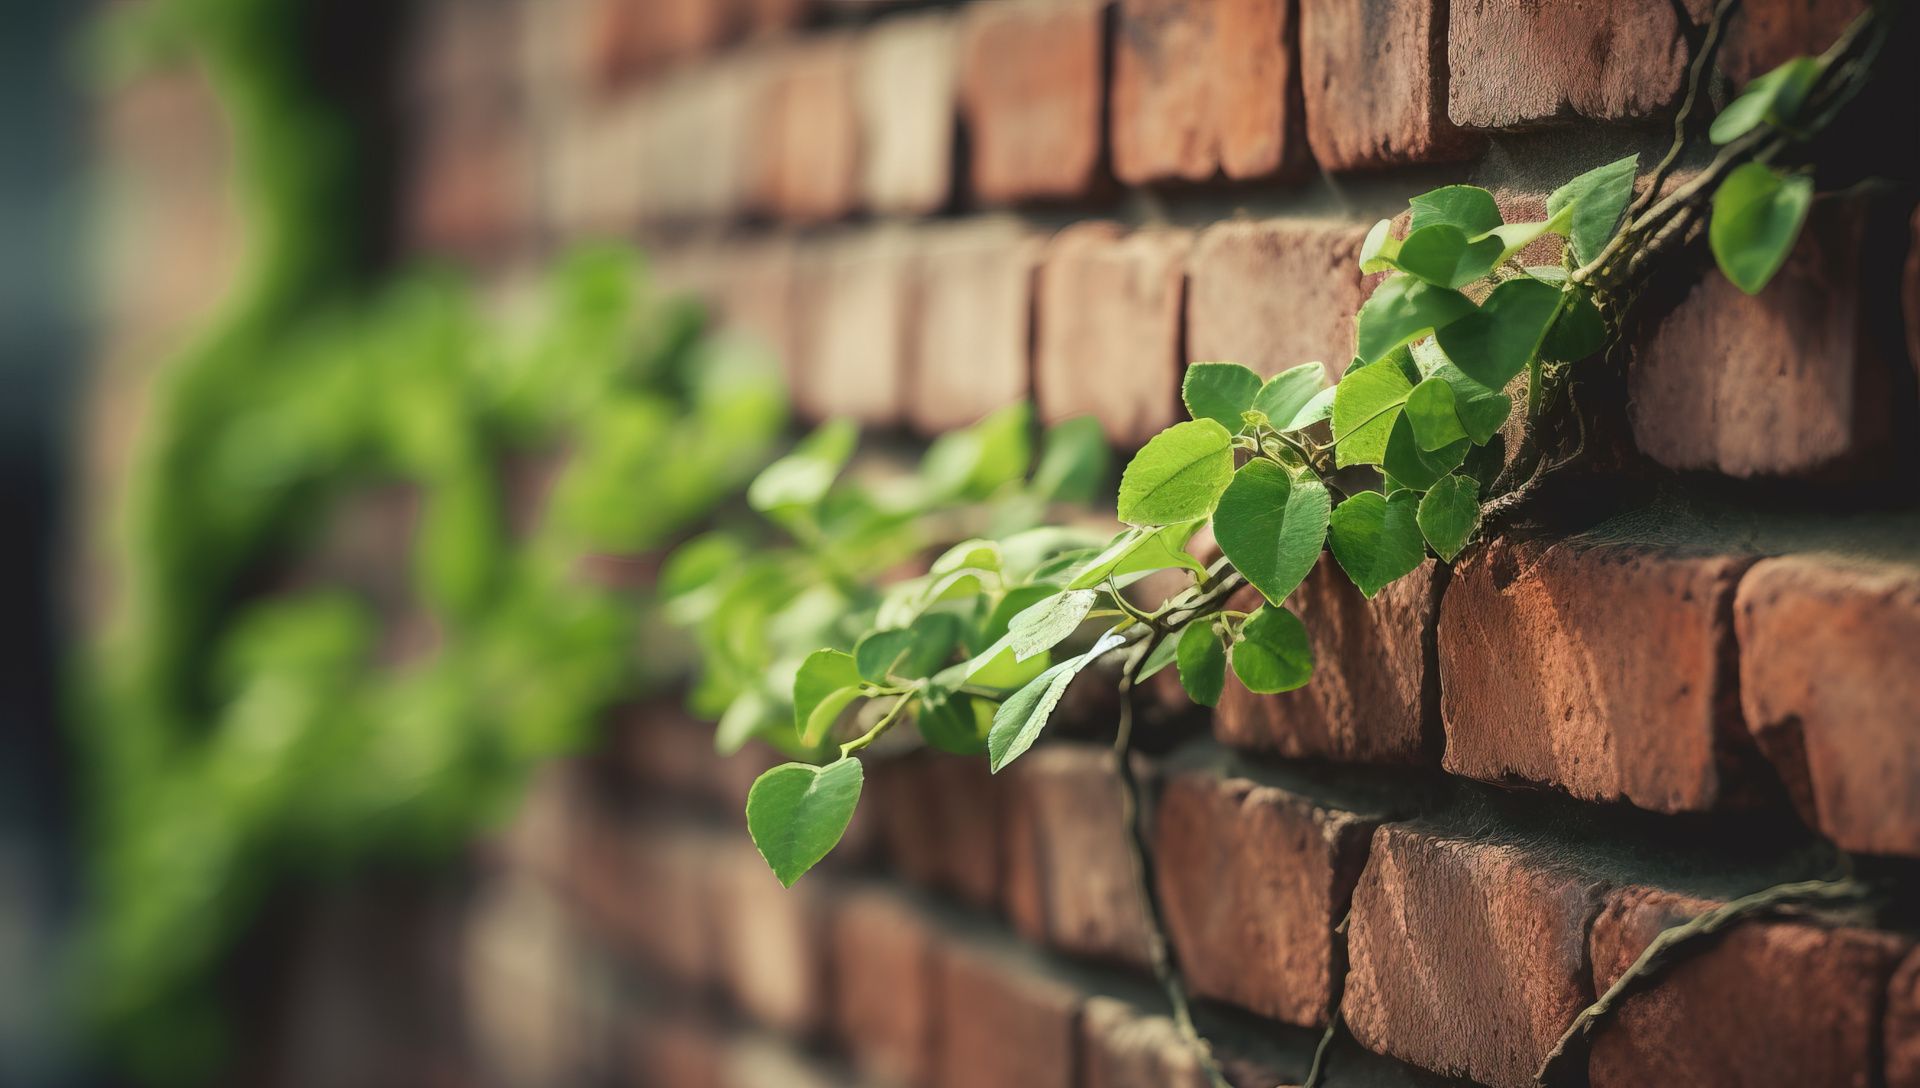 Brick wall with ivy running alongside